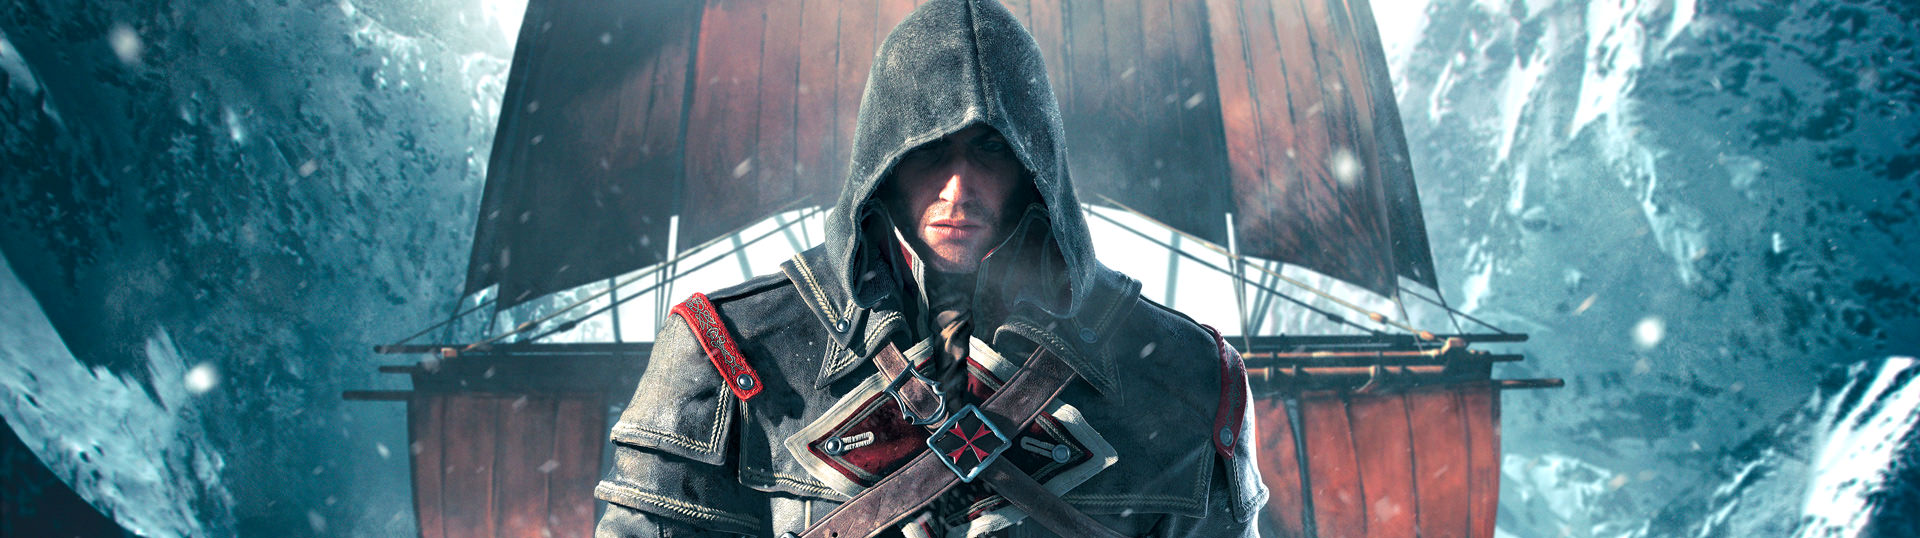 Assassins Creed Rogue Collector's Edition details